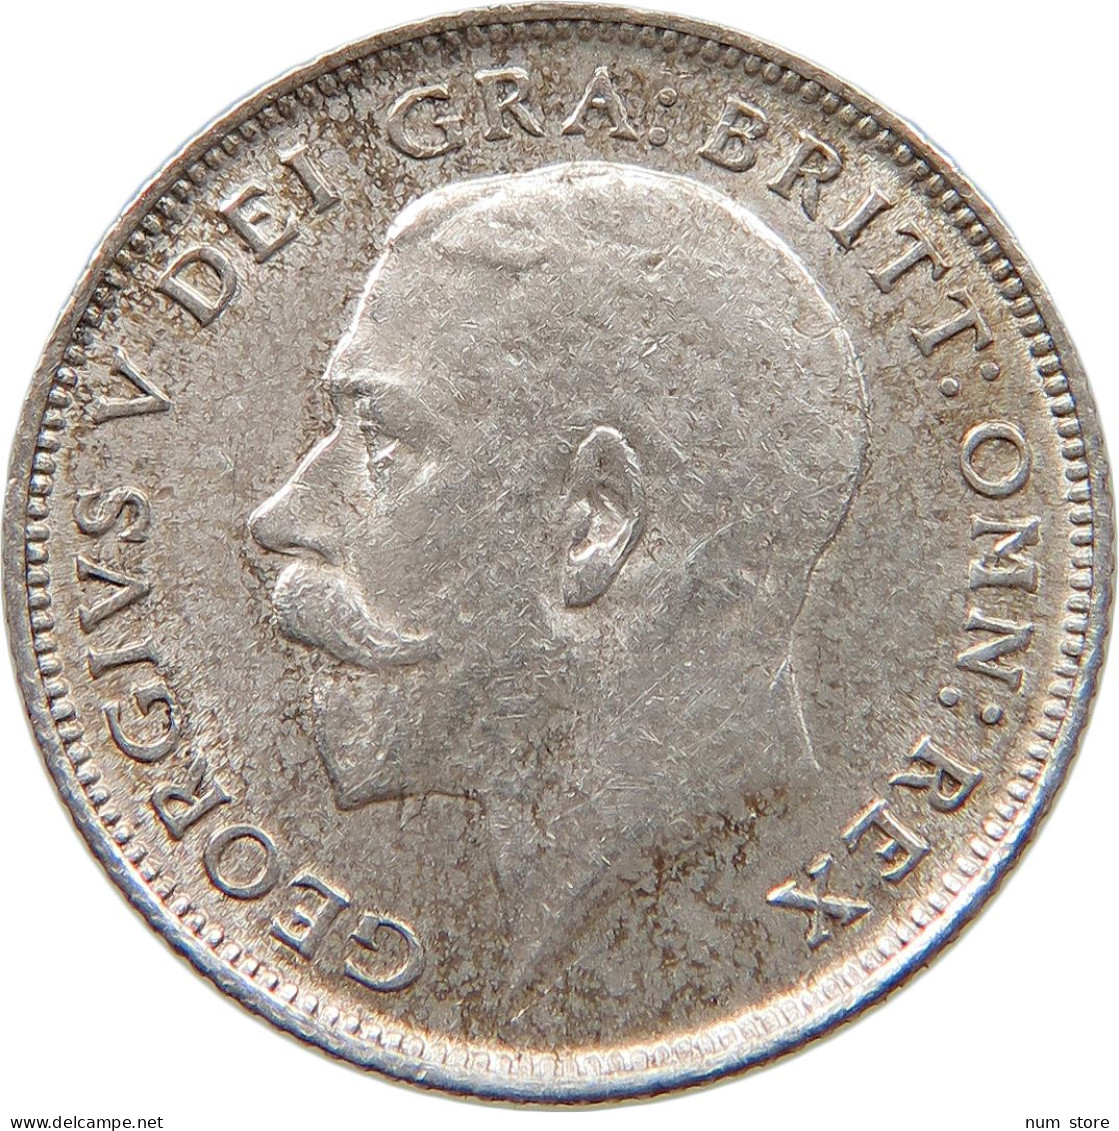 GREAT BRITAIN SIXPENCE 1911 George V. (1910-1936) #t115 0413 - H. 6 Pence